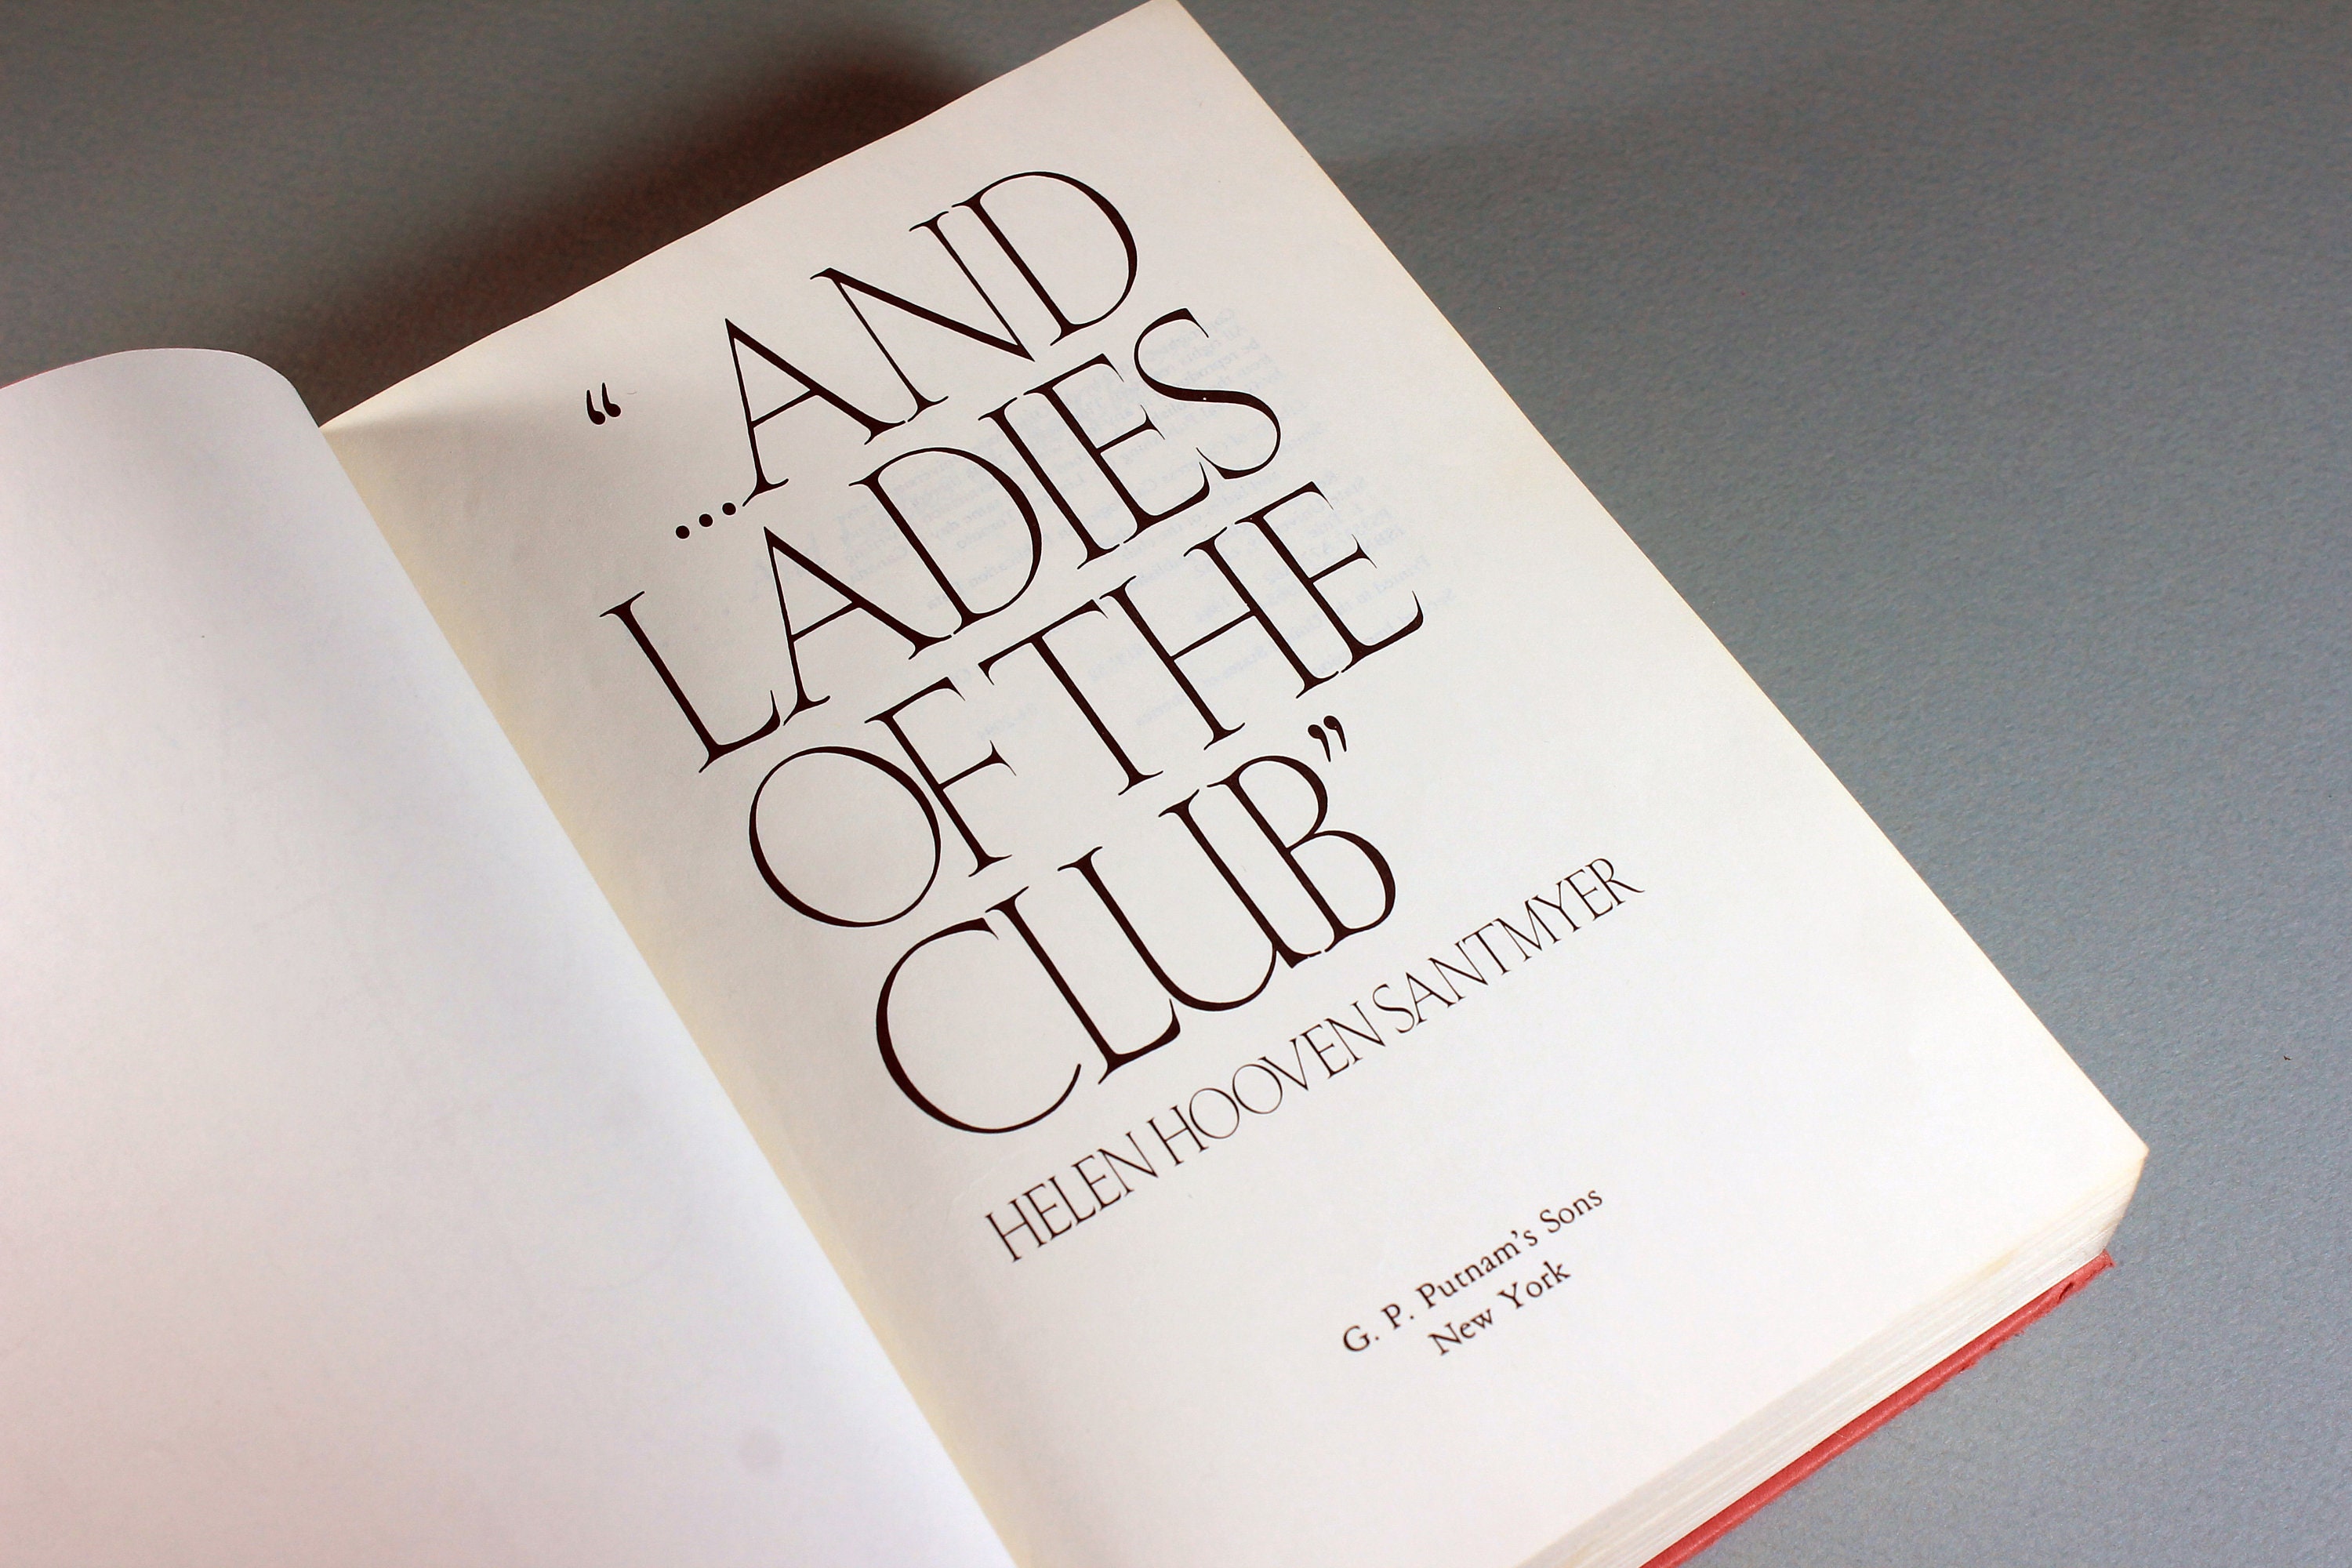 book review ladies of the club